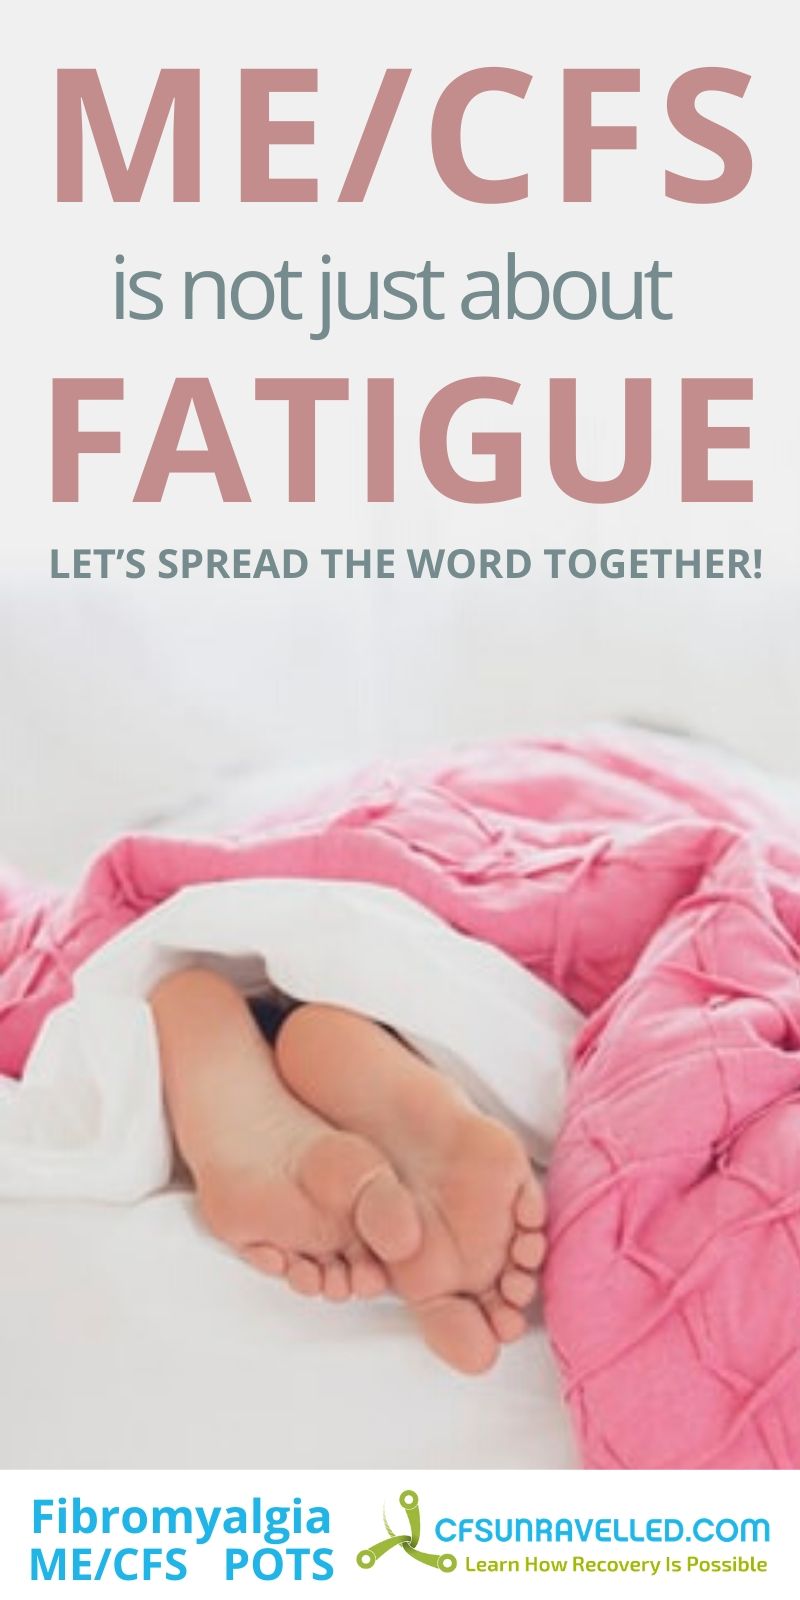 Person lying in bed with foot outside the blanket and MECFS is not just about fatigue text